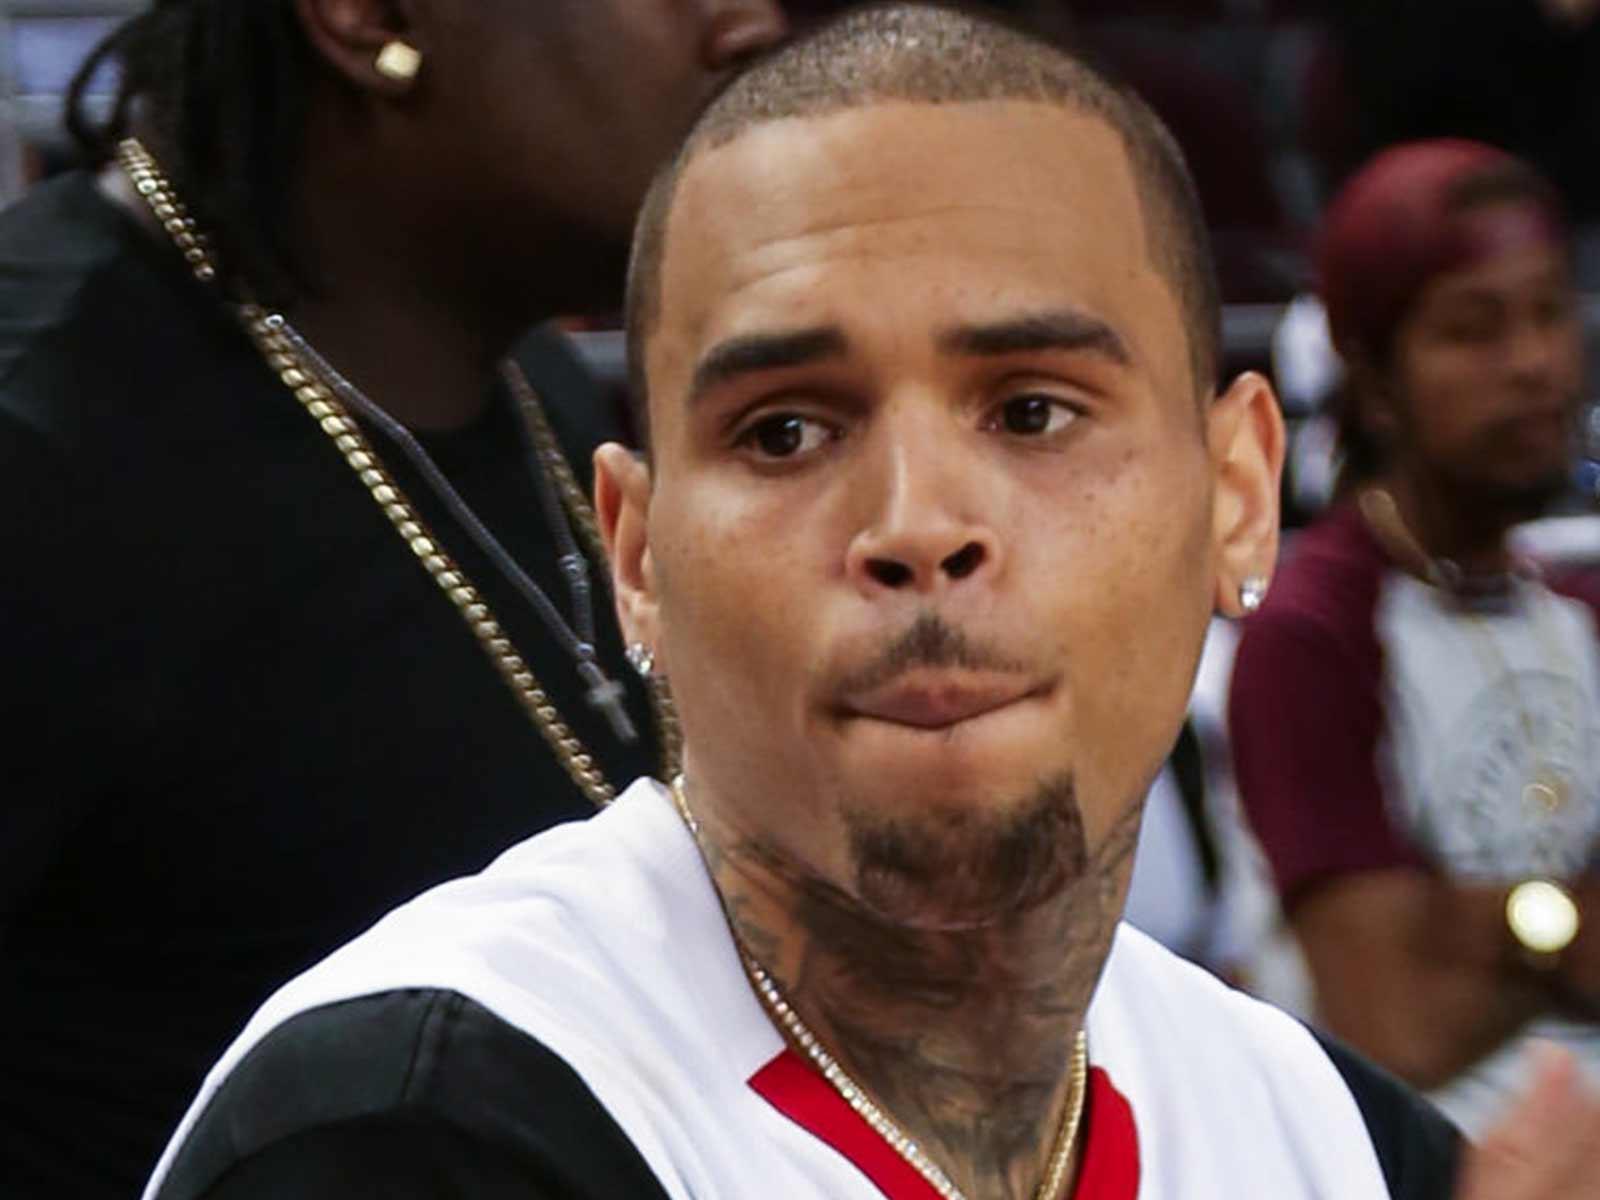 Chris Brown Plans to Sue the Woman Who Accused Him of Rape